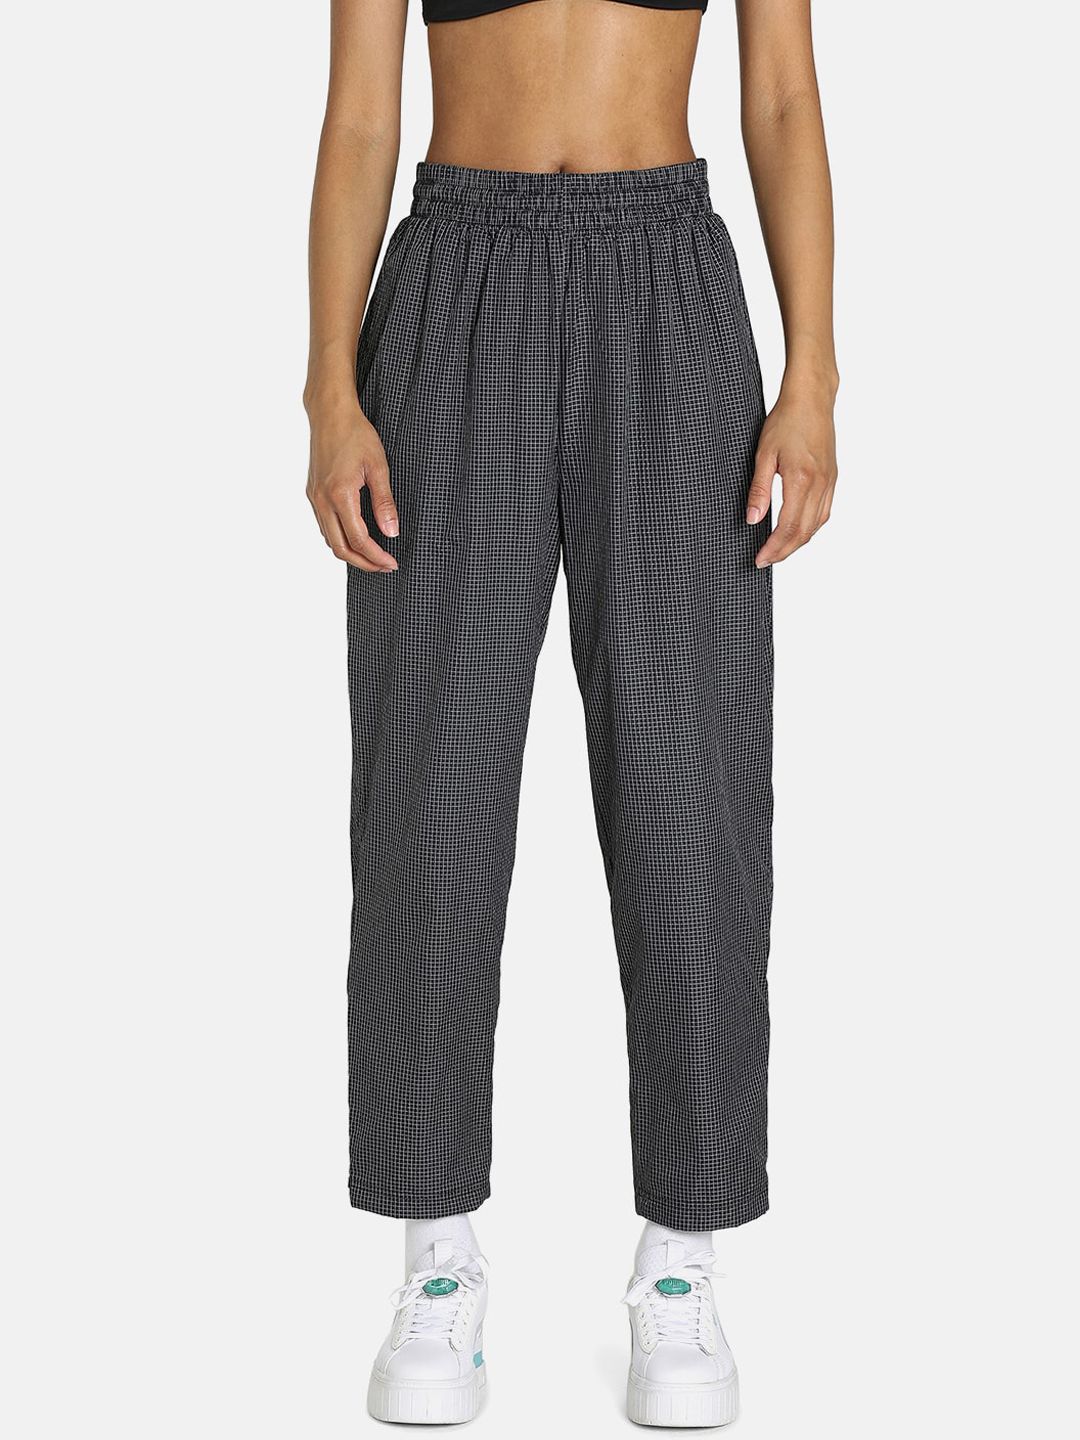 Puma Women Black & White SWxP Woven Relaxed-Fit Track Pant Price in India